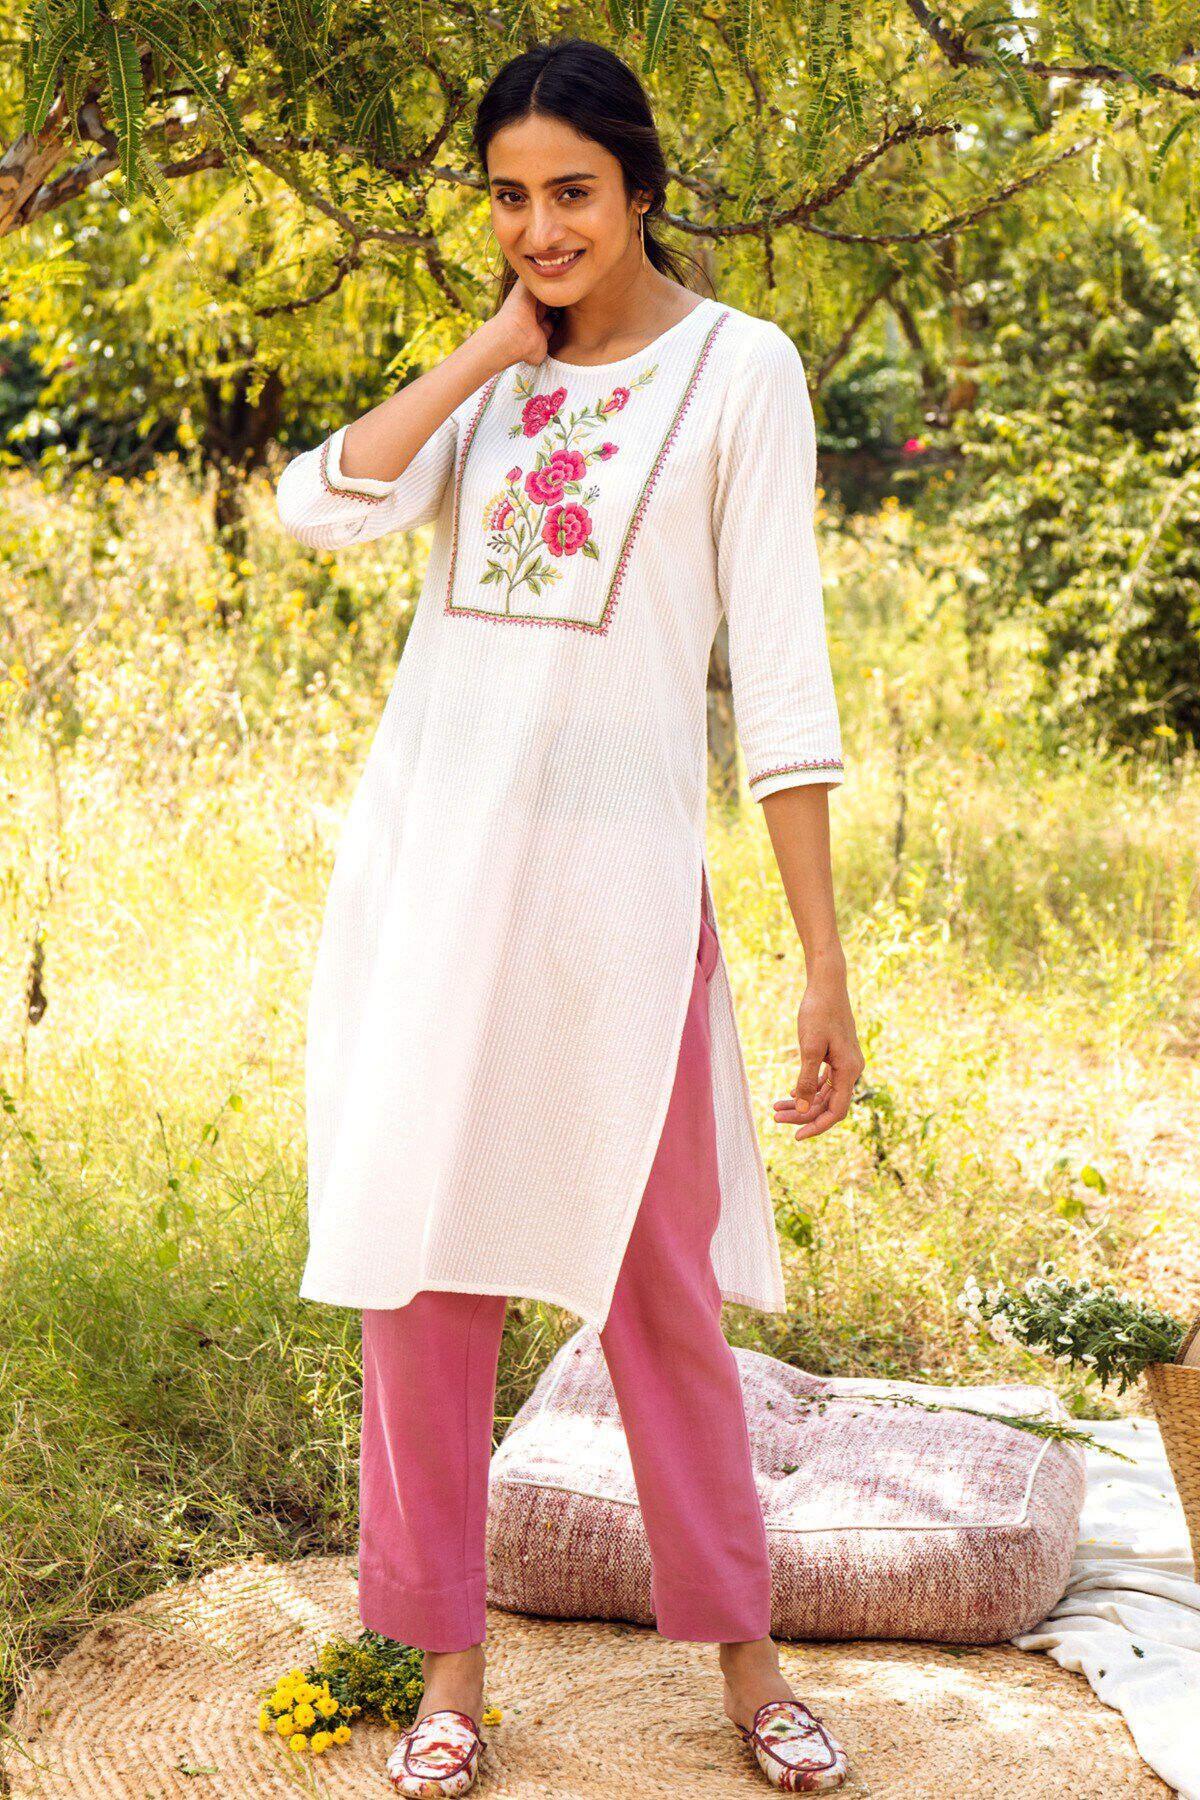 31 Different Types of Kurtis - Everything You Need to Know About Kurtis